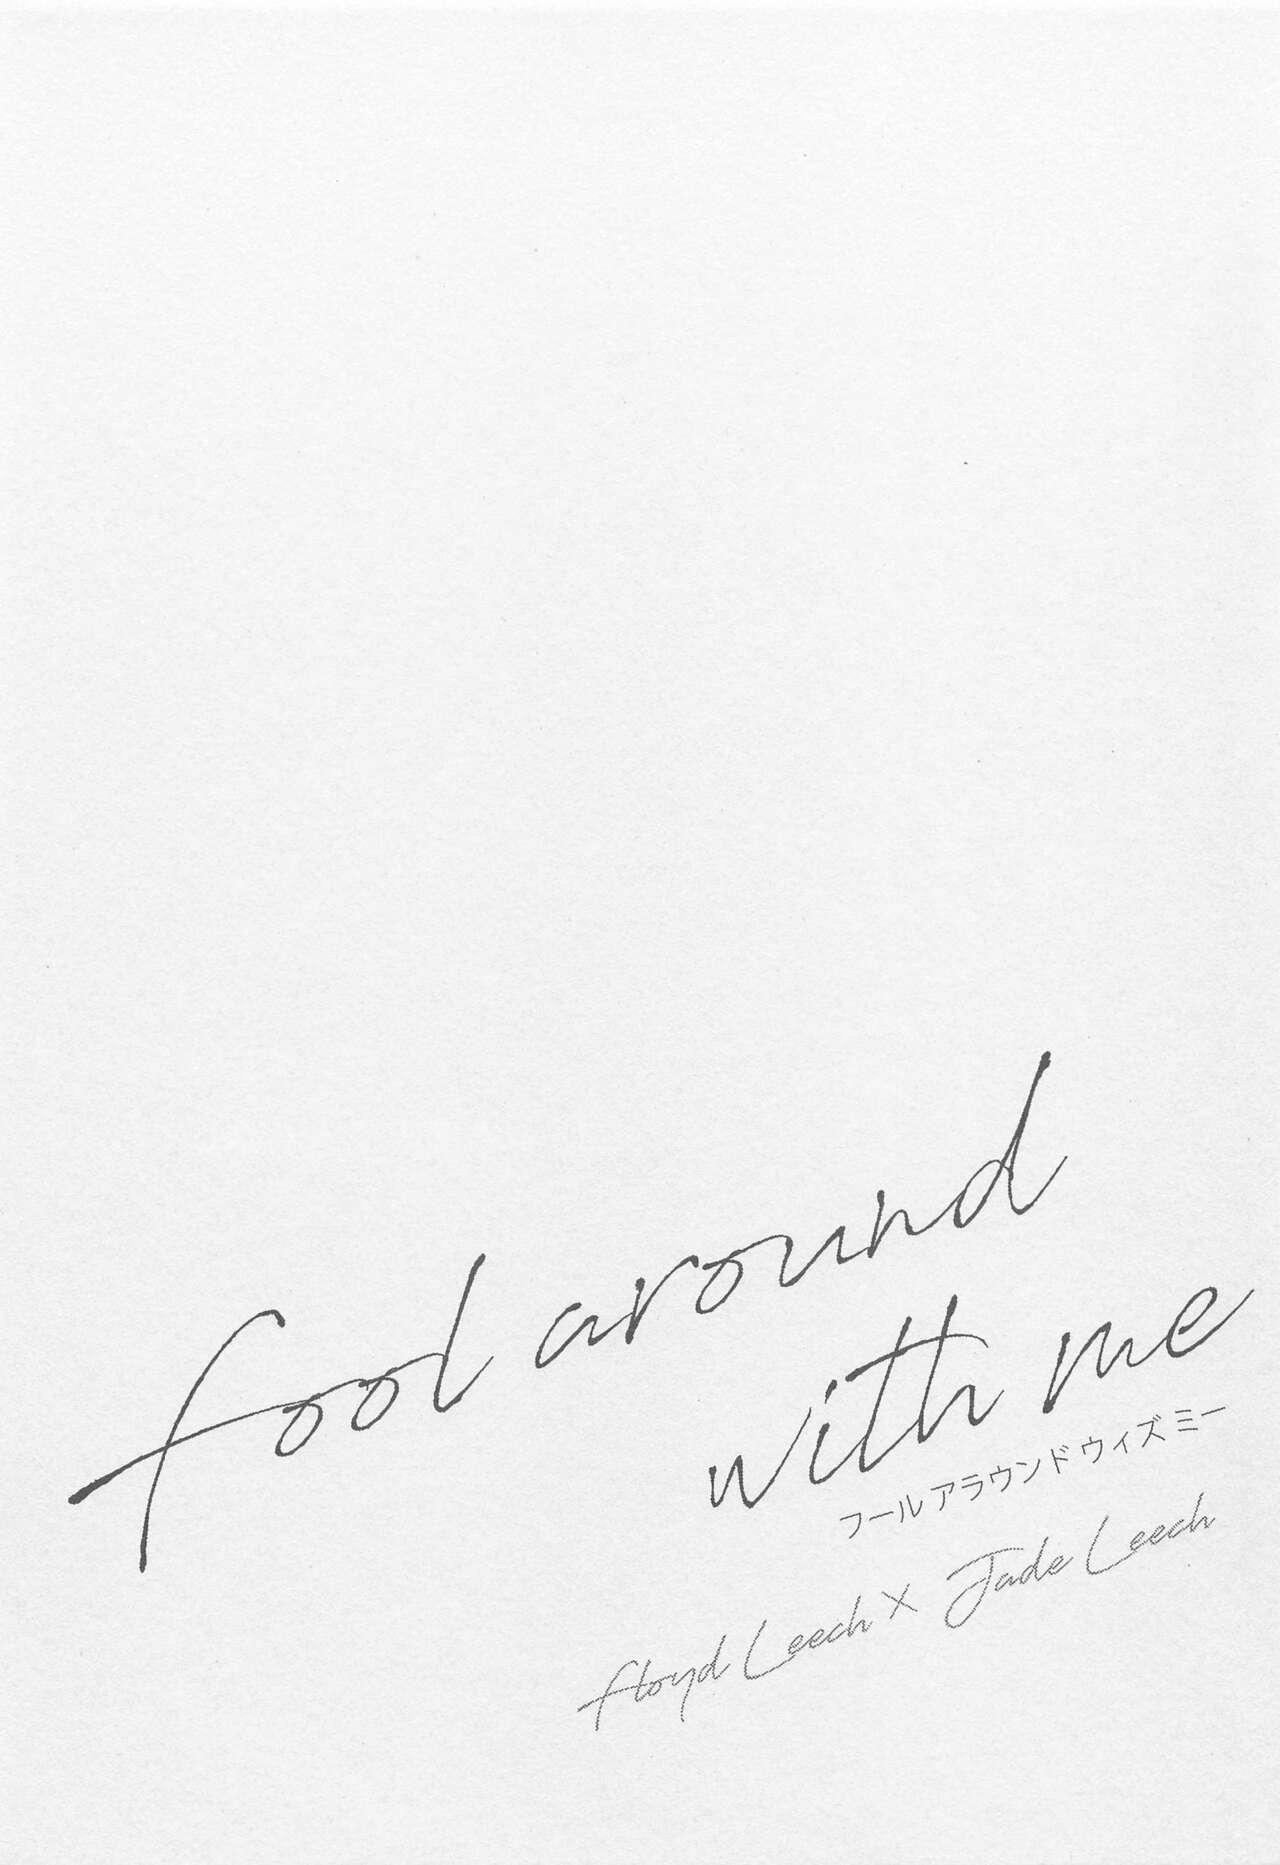 Fool around with me 2